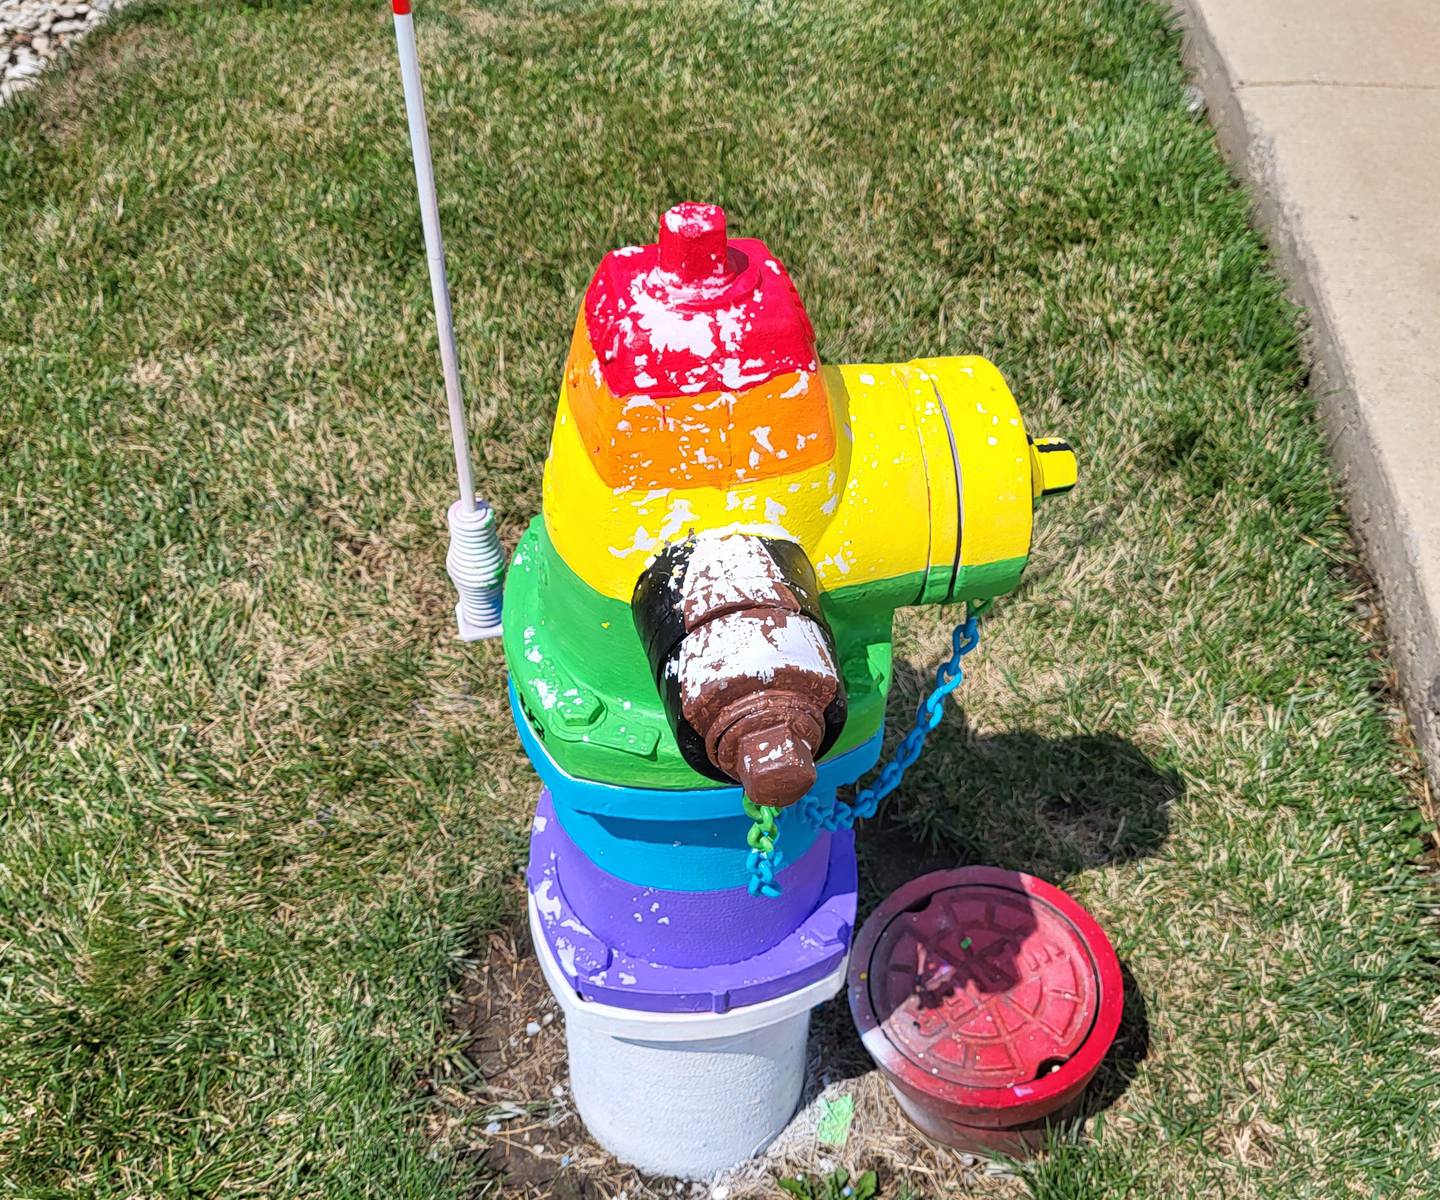 Someone scraped the paint off a fire hydrant painted with pride and transgender colors as part of the Art on Fire program in Geneva. Artist Chrissy Swanson reported it to police on Sunday, July 24, and repainted it. This was the fourth time the hydrant at State Street and Kirk Road was defaced this month.